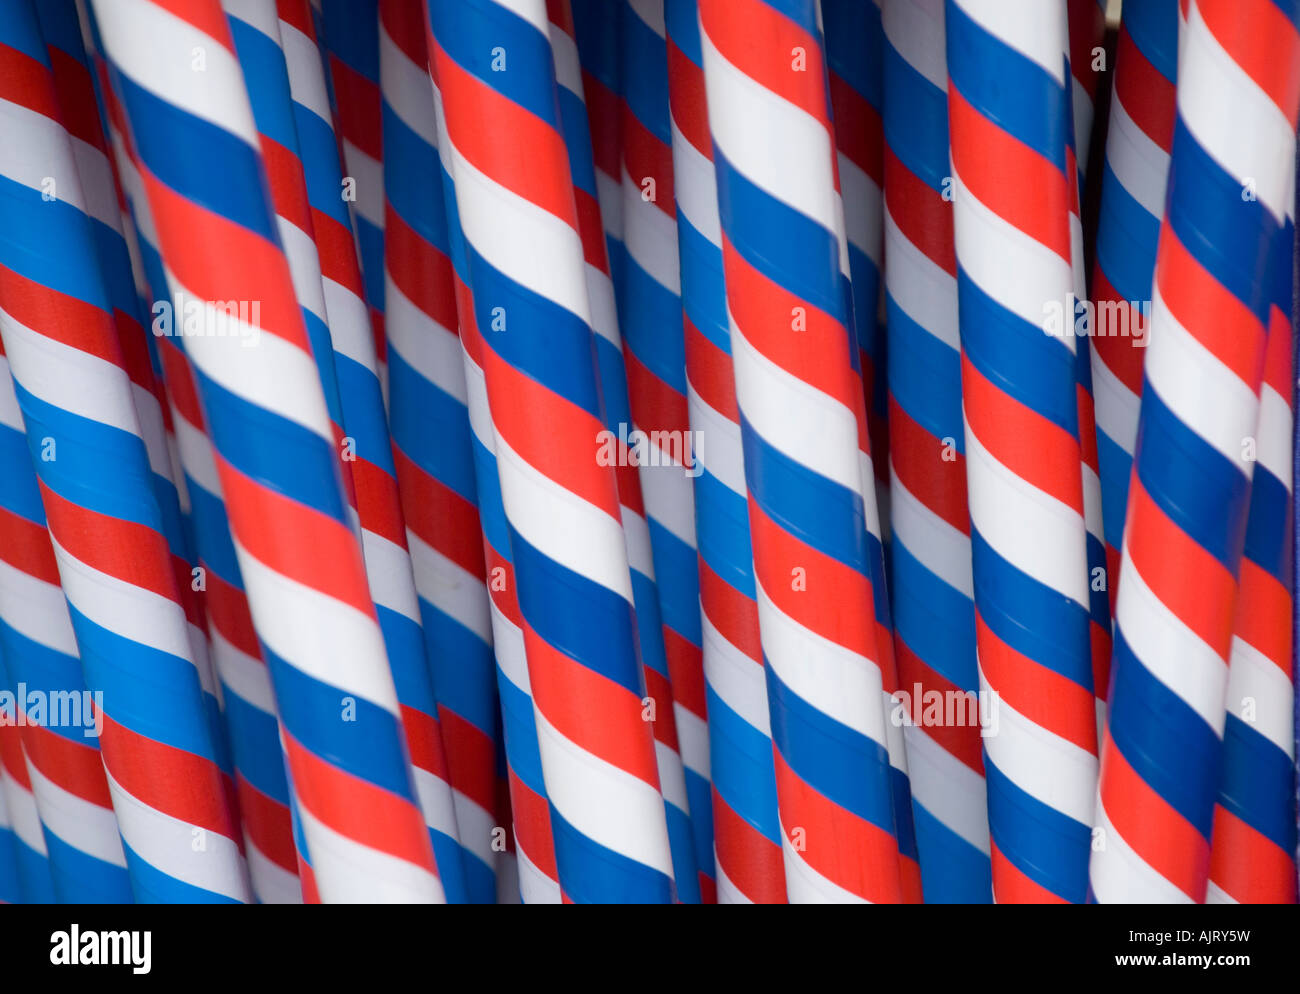 Red, White and Blue band-sticks Stock Photo